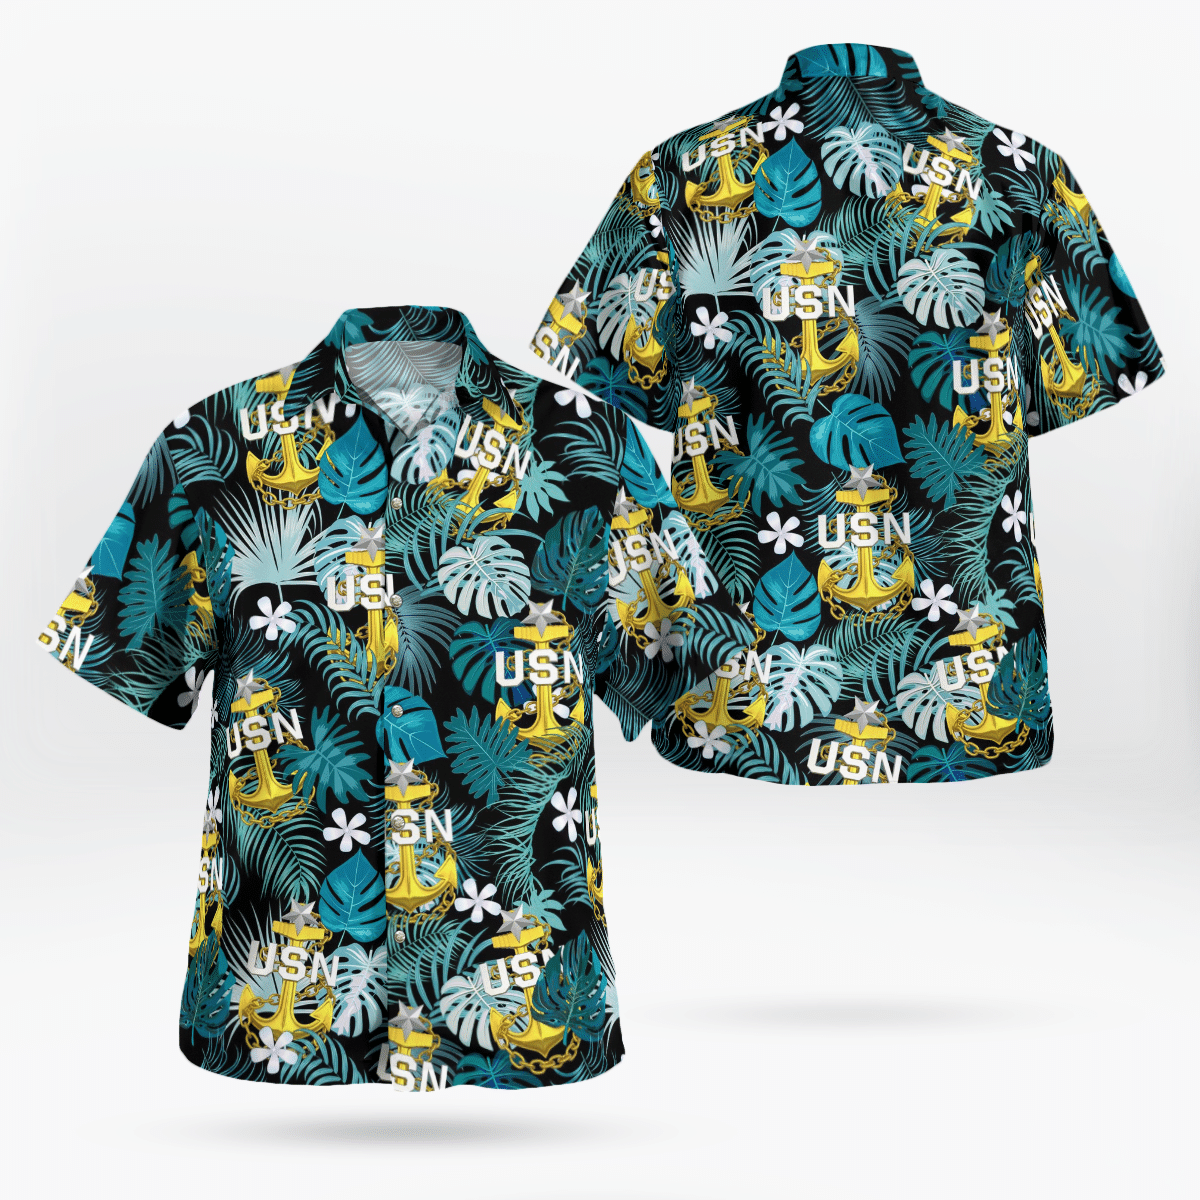 Consider getting these Hawaiian Shirt for your friends 321